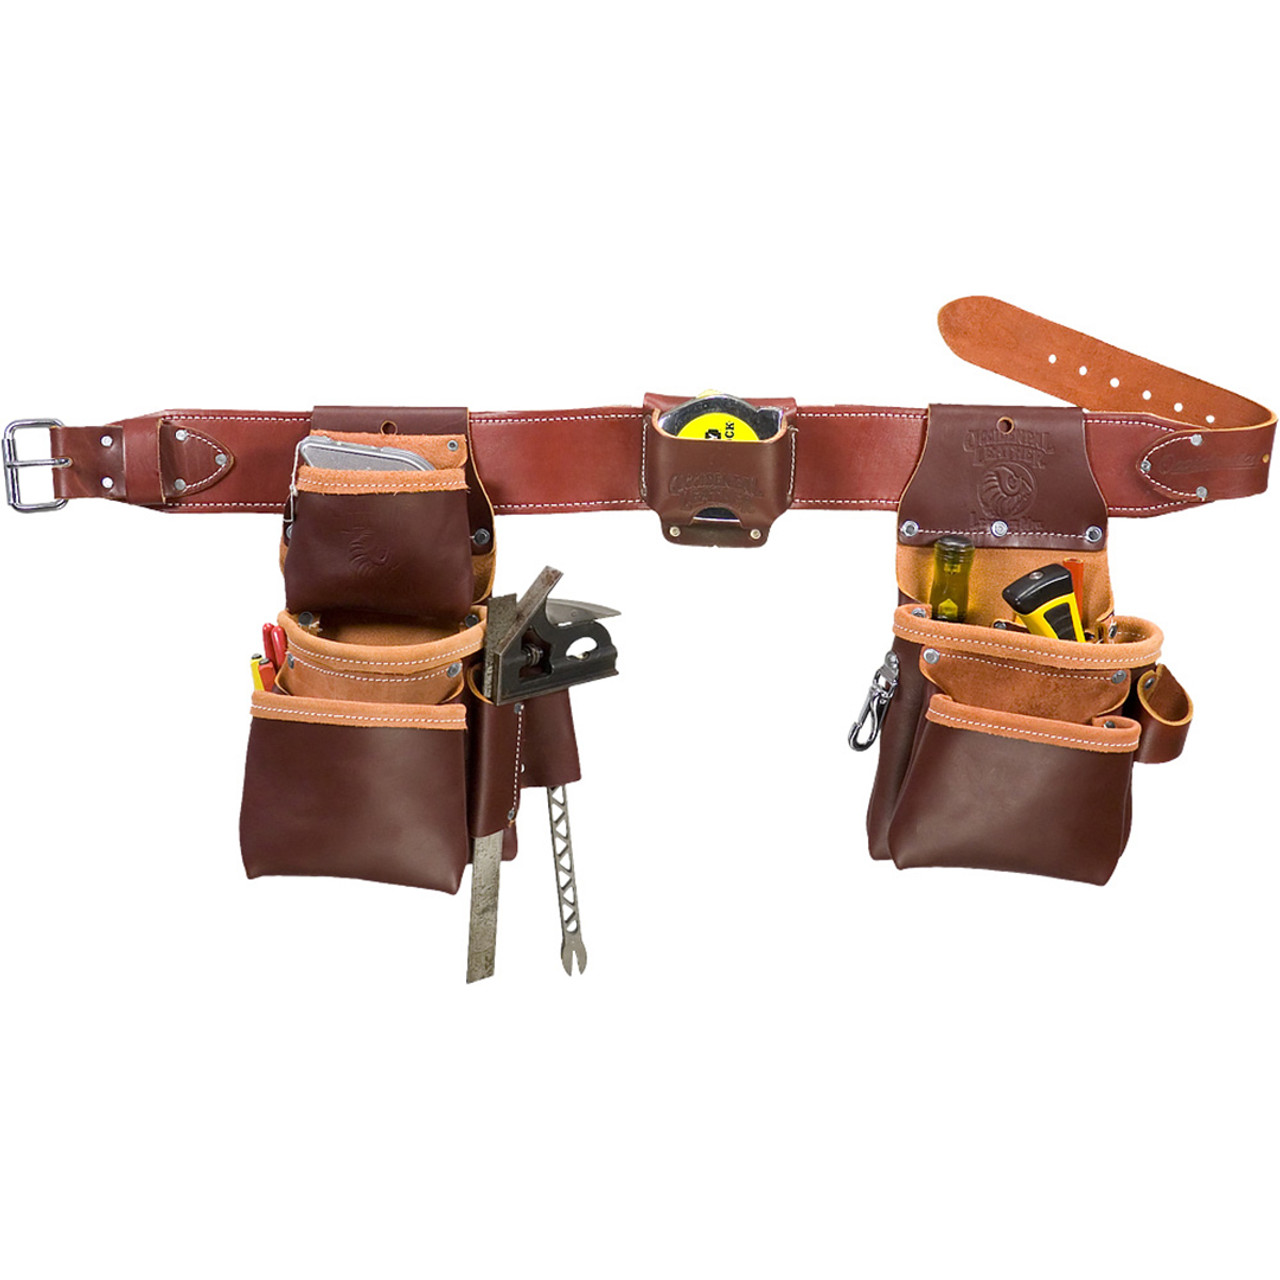 Occidental Leather 5523 Clip-On in Tool Tape Holder by Occidental - 3